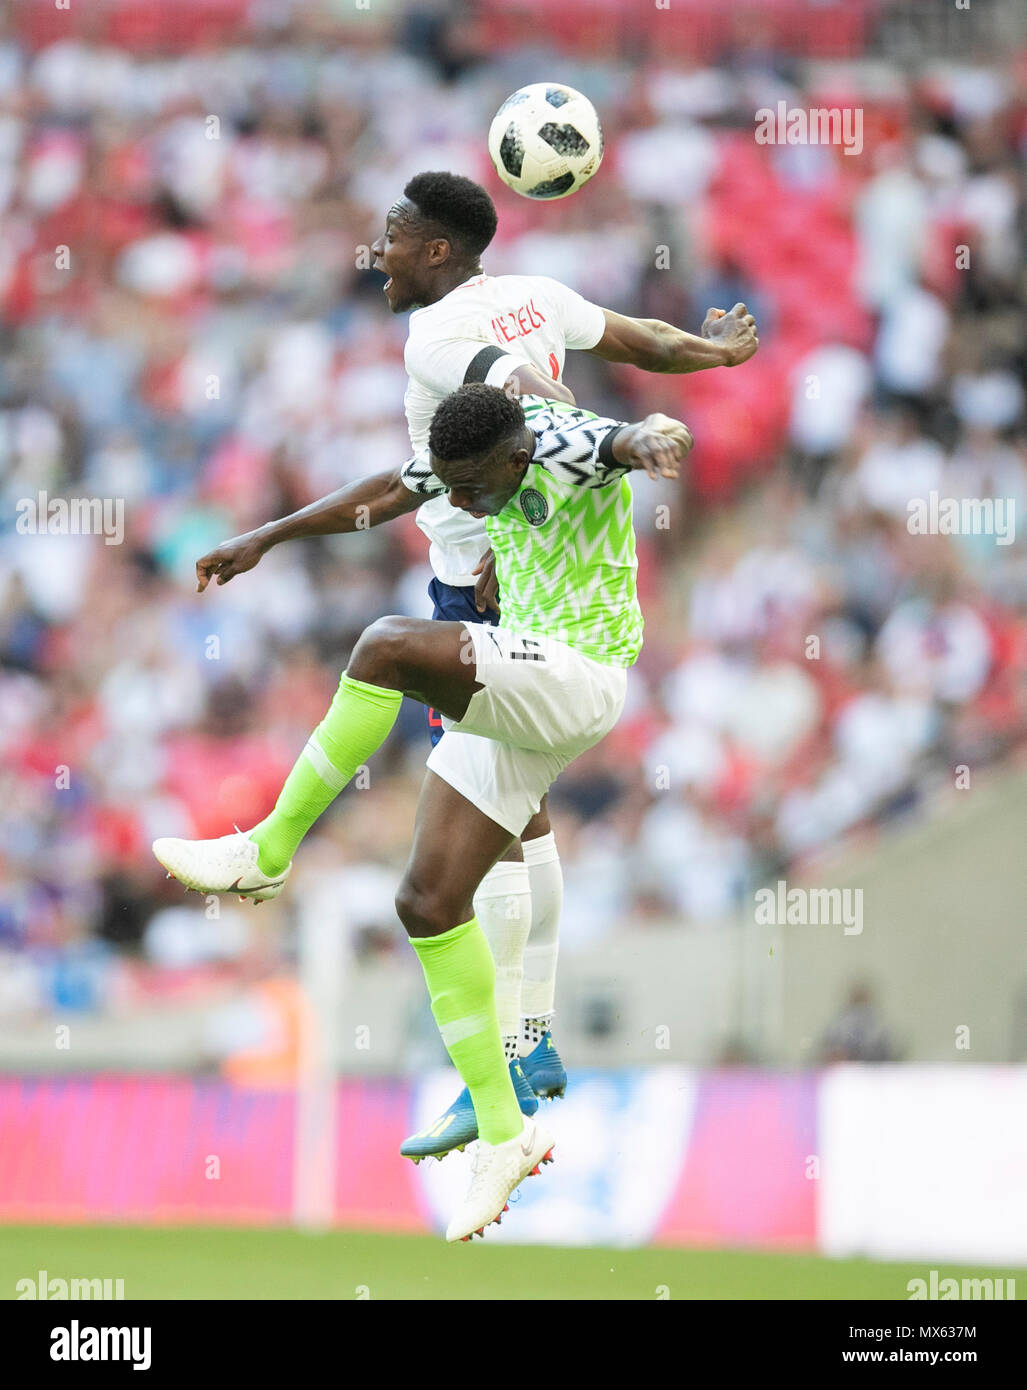 London, UK. 2nd June, 2018. England's Danny Welbeck (top) vies with Nigeria's Kenneth Omeruo during the International Friendly Football match at Wembley Stadium in London, Britain on June 2, 2018. England won 2-1. Credit: Han Yan/Xinhua/Alamy Live News Stock Photo